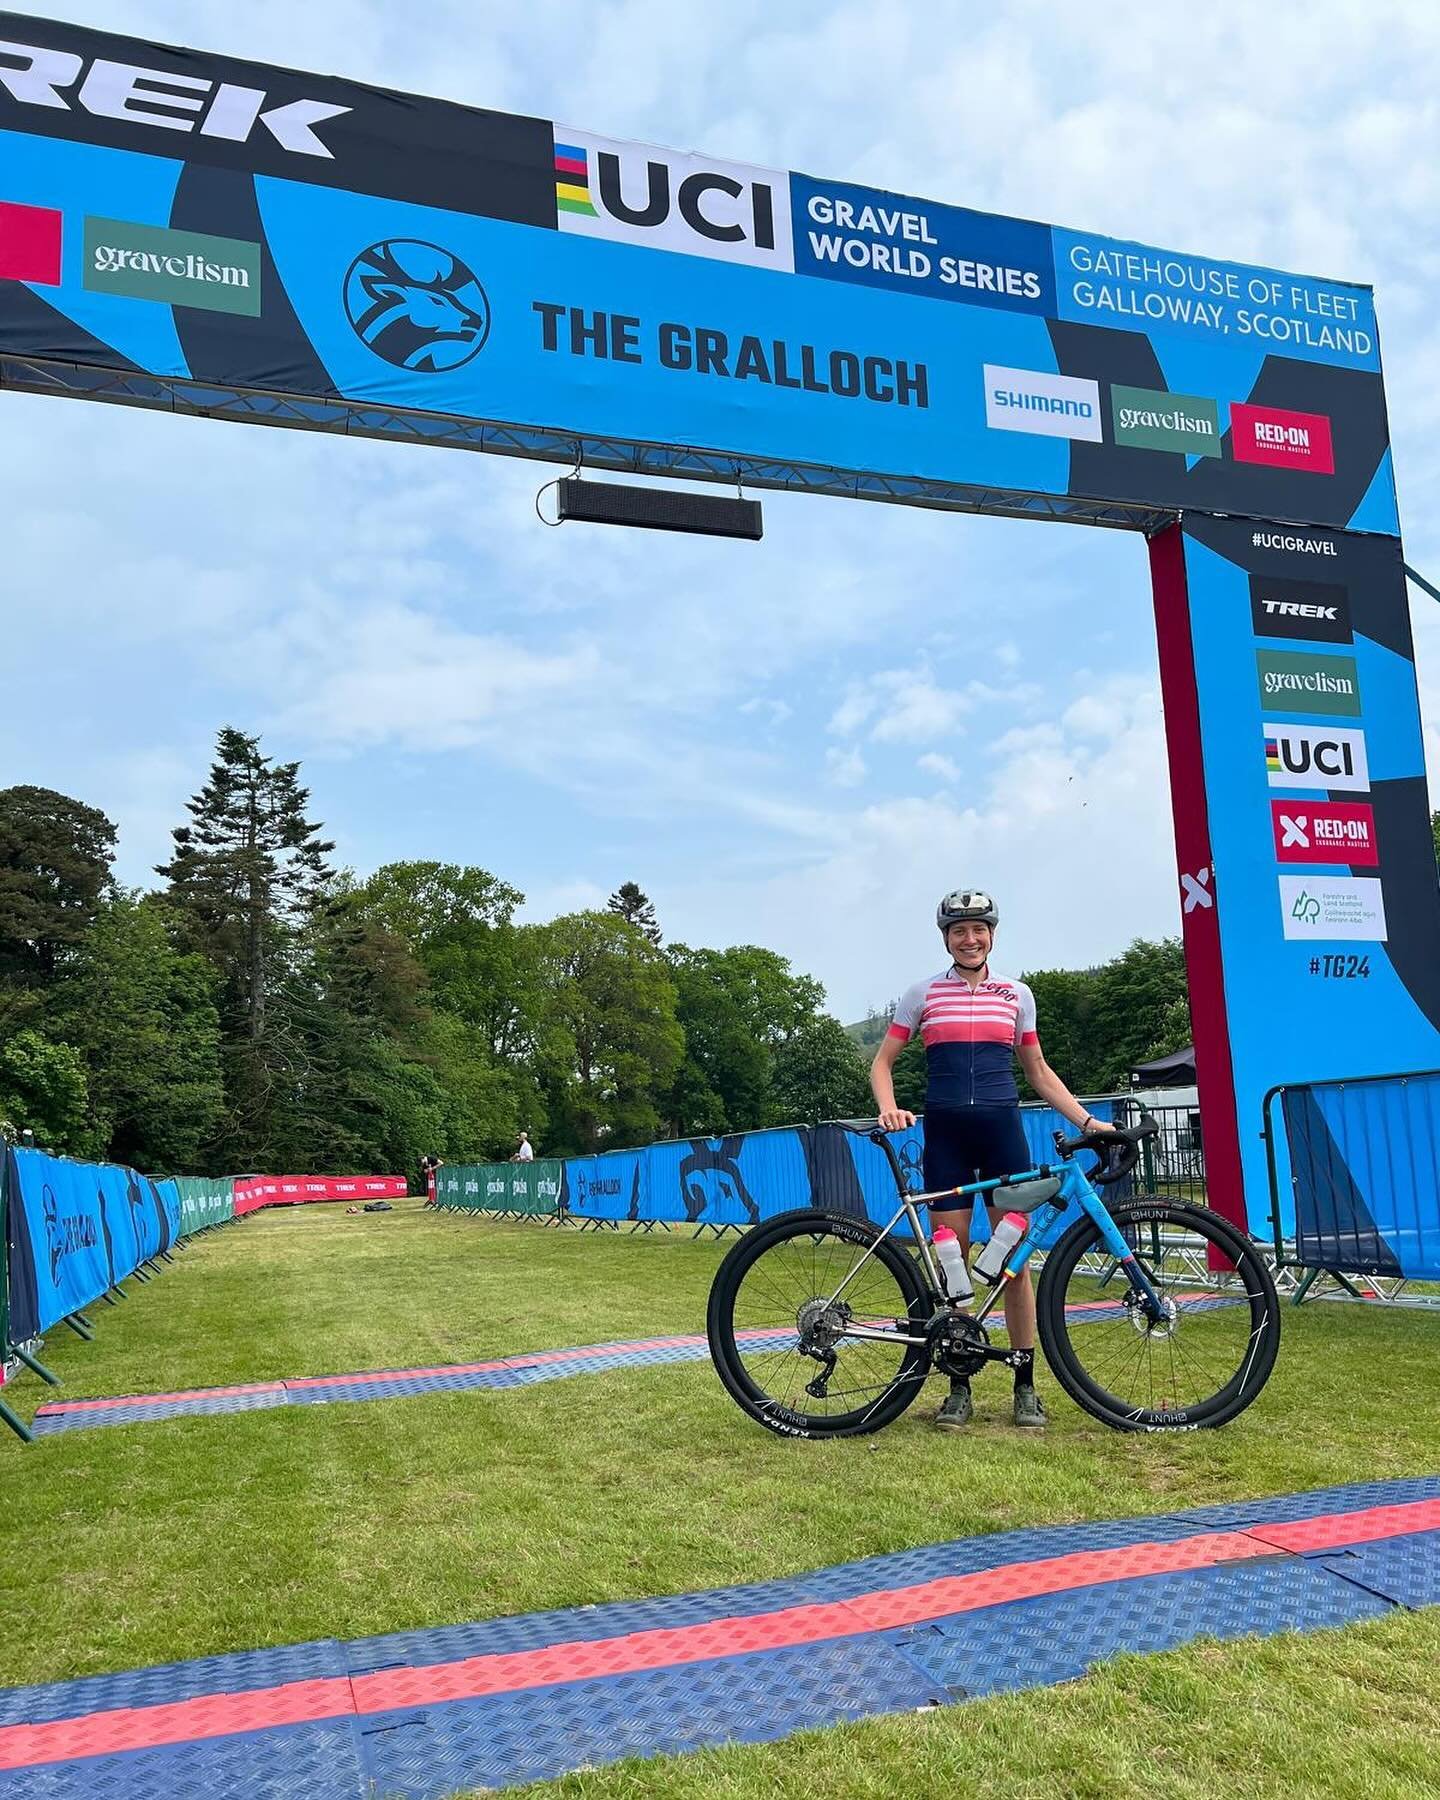 The Gralloch is coming up tomorrow 😊🏴󠁧󠁢󠁳󠁣󠁴󠁿

Super excited to be racing here tomorrow! I just posted a new blog talking about the course, my racing strategy, personal goals and bike set up linked in my bio! 

This will be my set up for tomorr